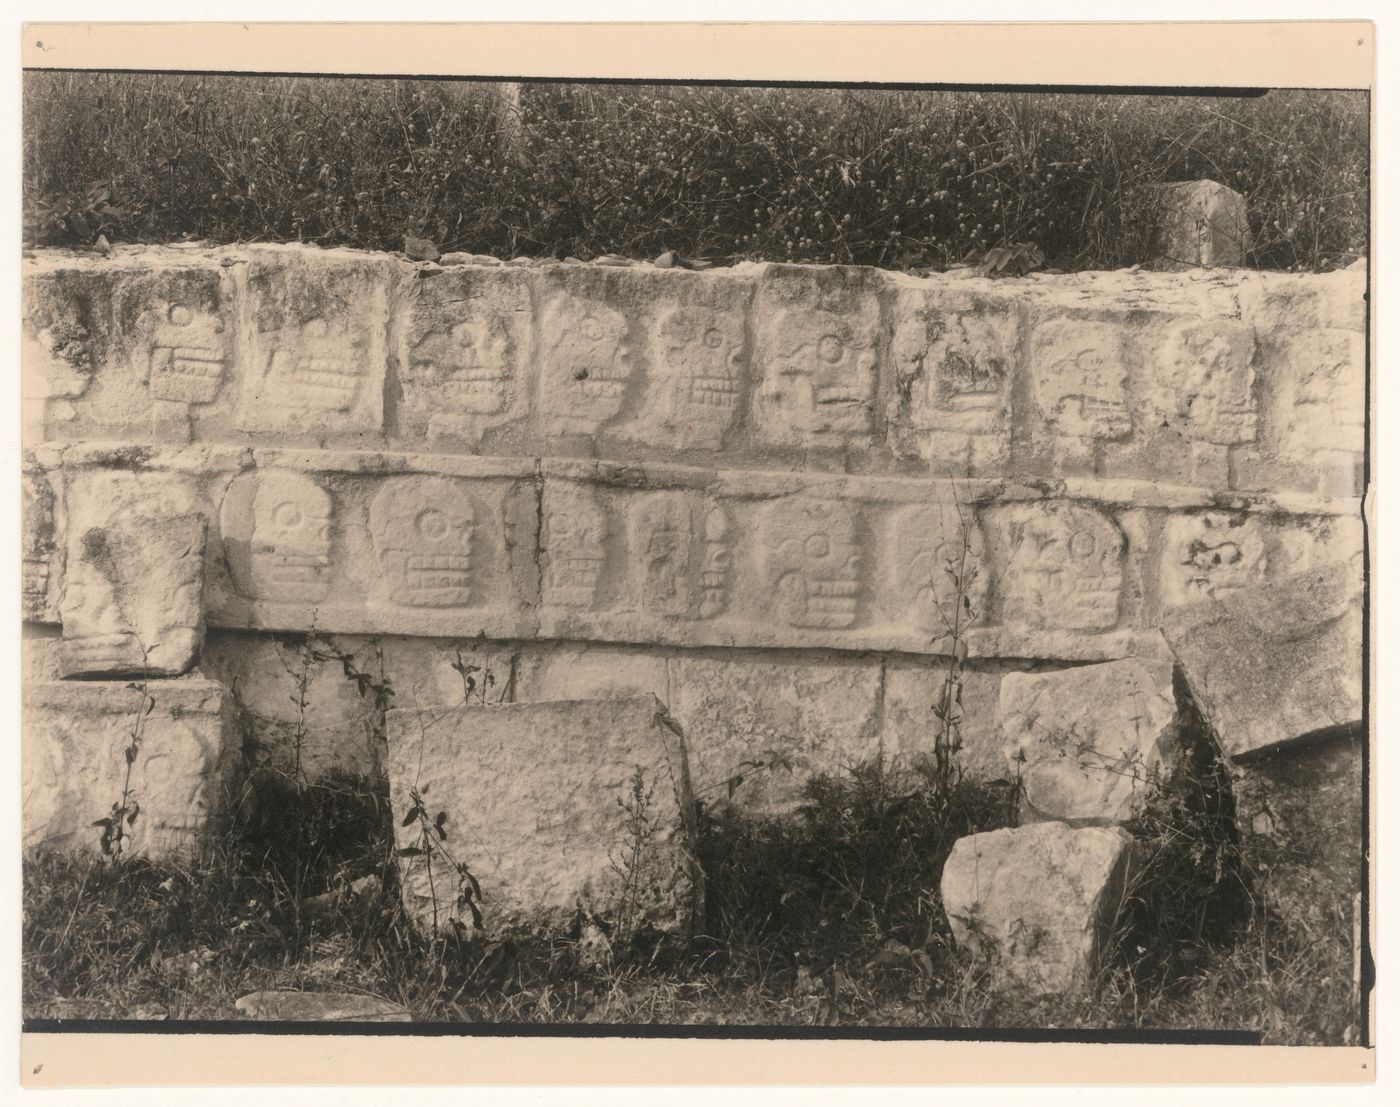 Close-up view of a parapet in the Tzompantli [skull rack] showing relief carvings of skulls, Chichén Itzá Site, Yucatán, Mexico